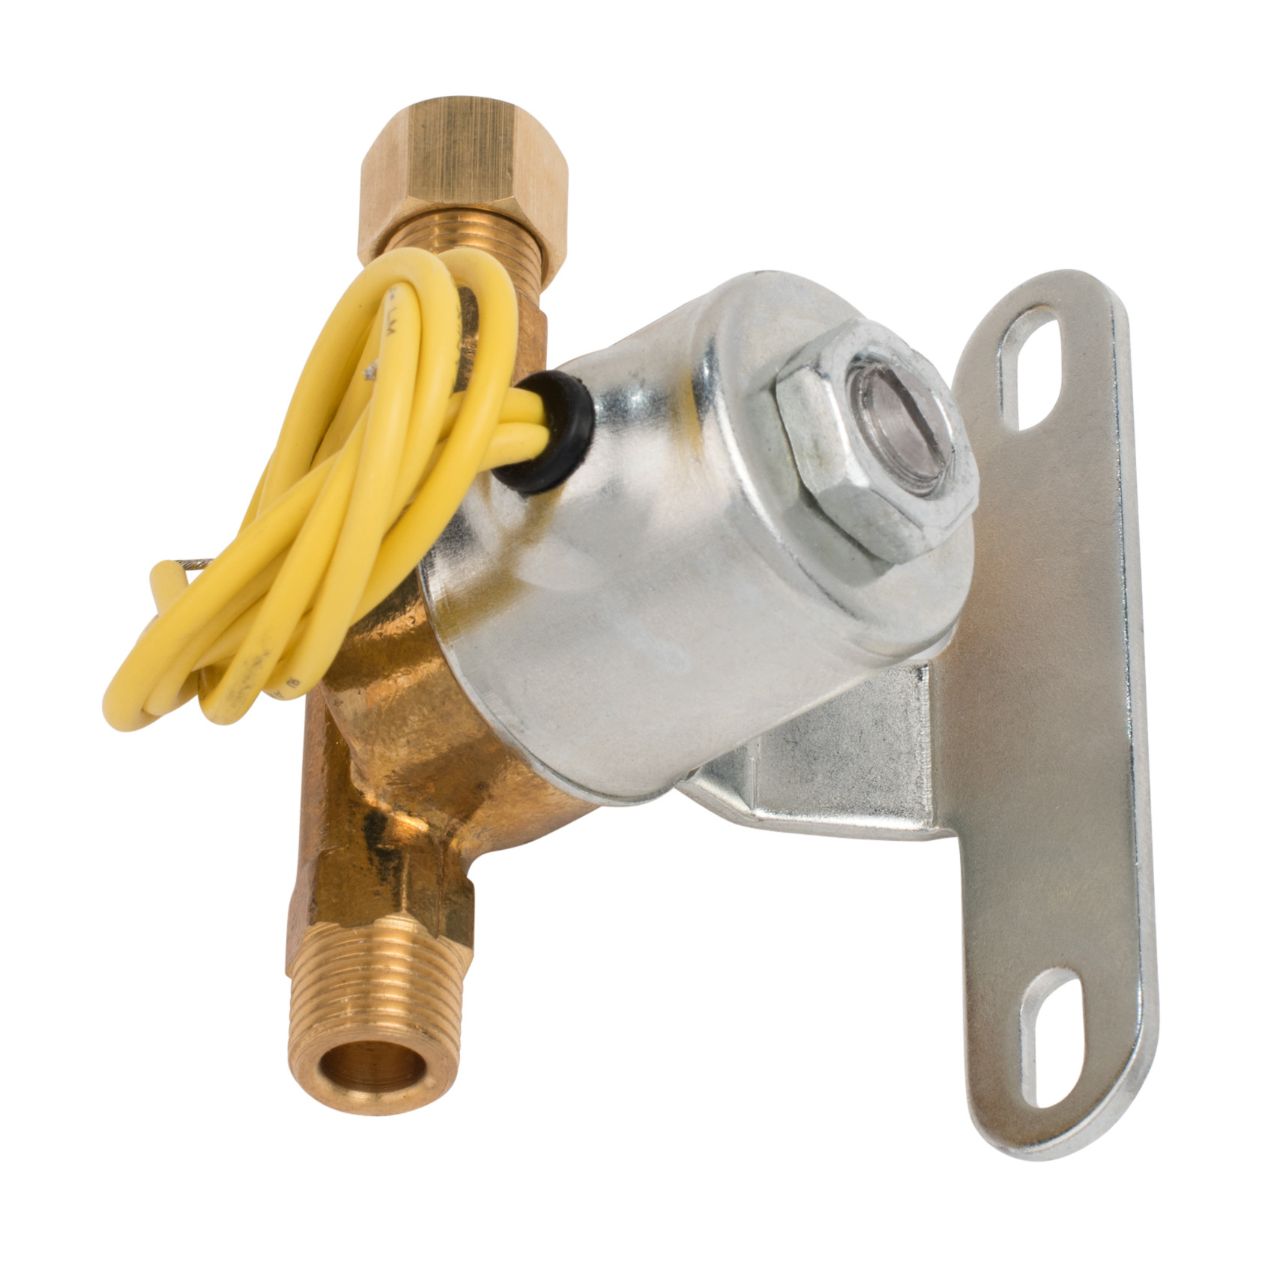 Aprilaire Solenoid Valve Is A 24 Volt Ac Electrically-operated Valve That Turns The Water On And Off To Your Humidifier. 2172200